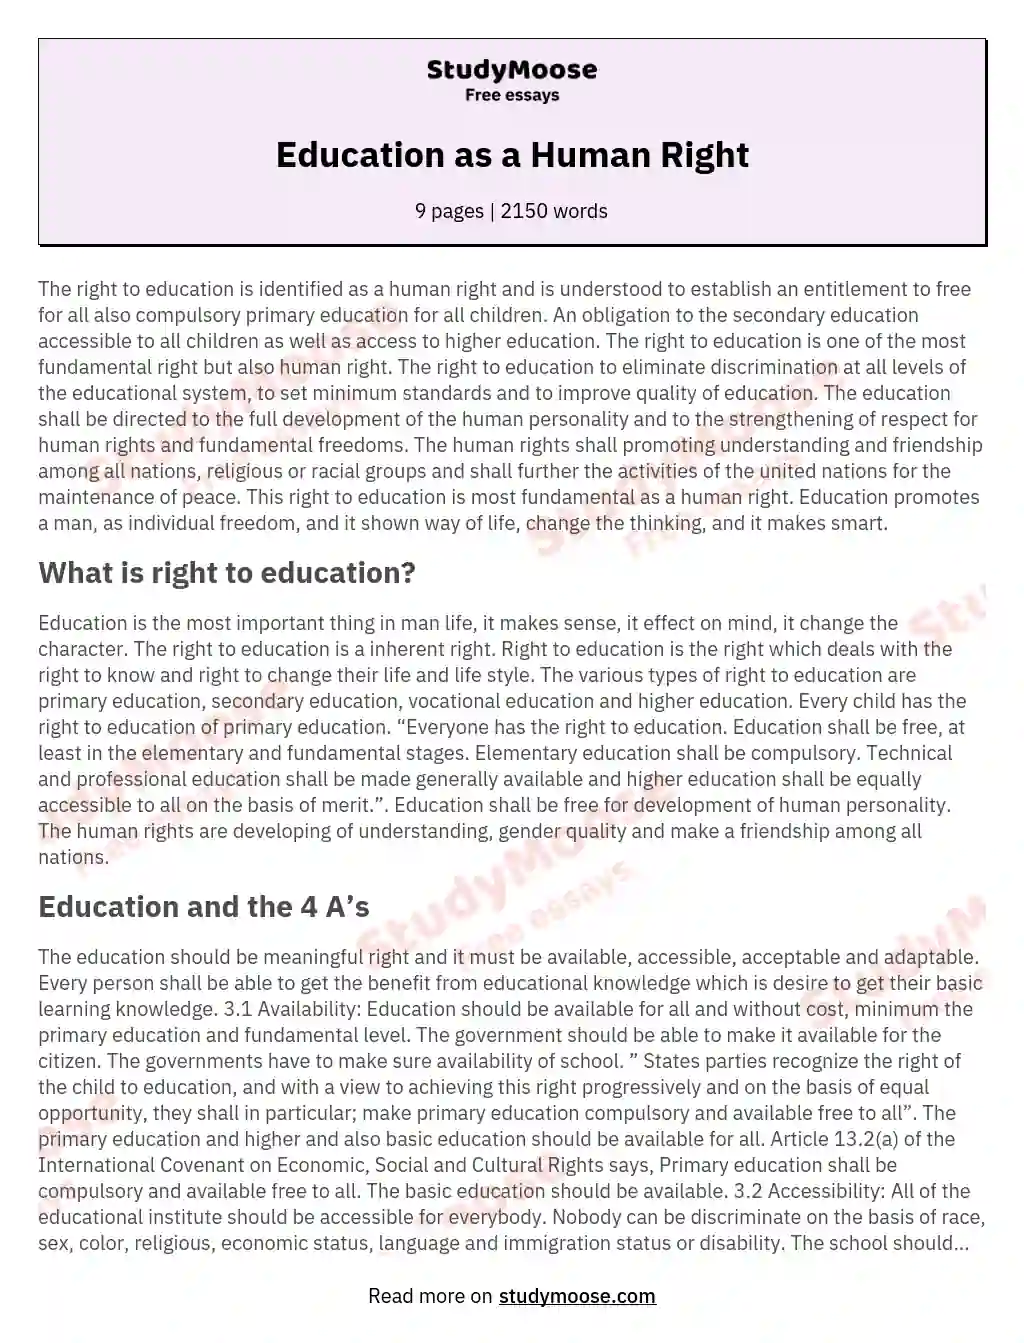 essay about human rights education